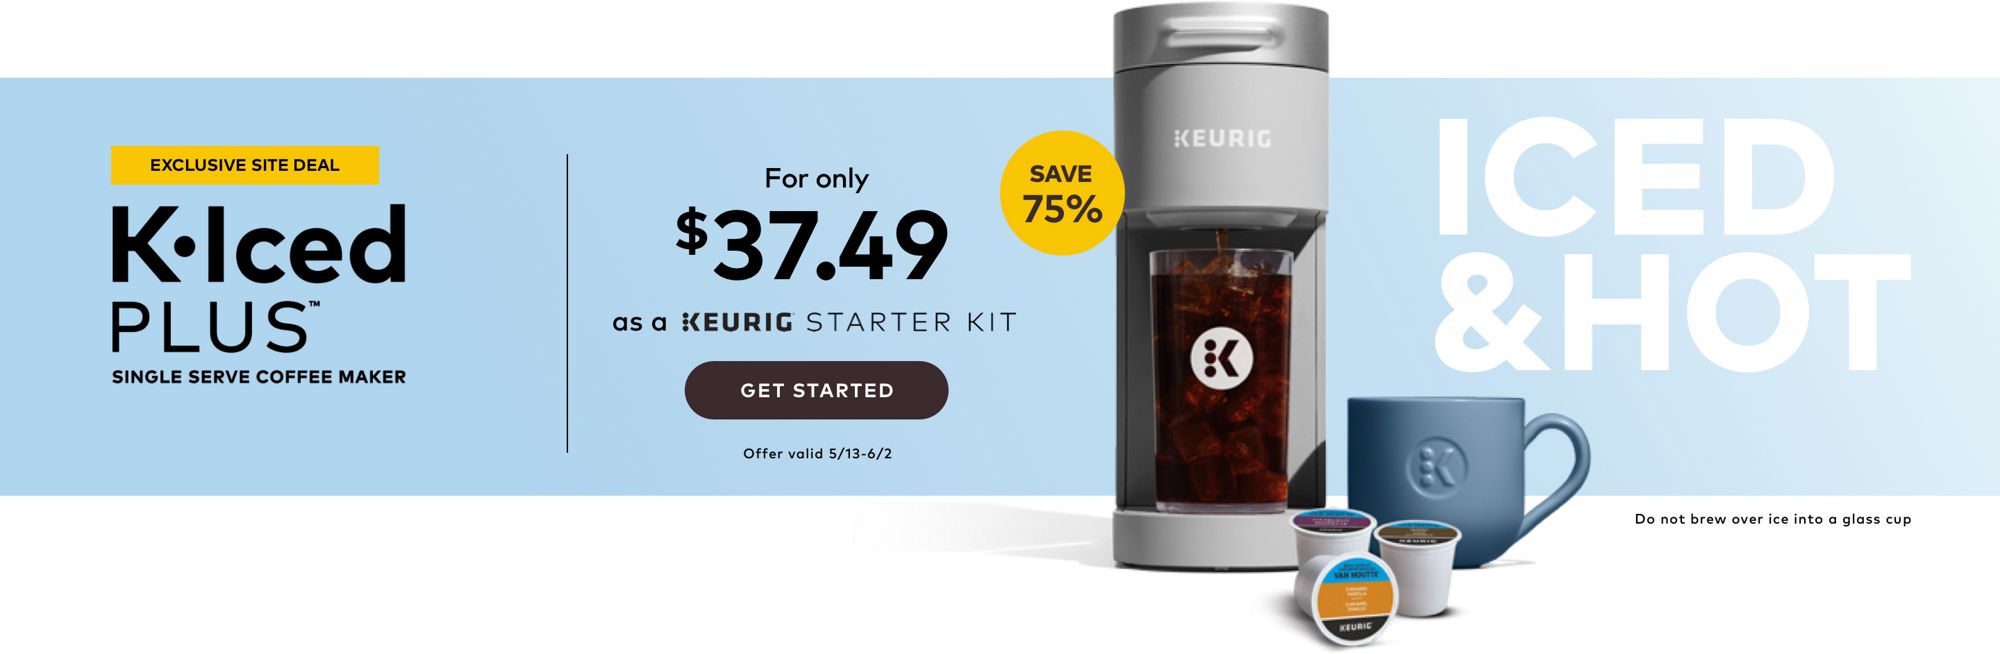 Exclusive Site Deal get a K-Iced™ Plus for only $37.49 as a KEURIG STARTER KIT